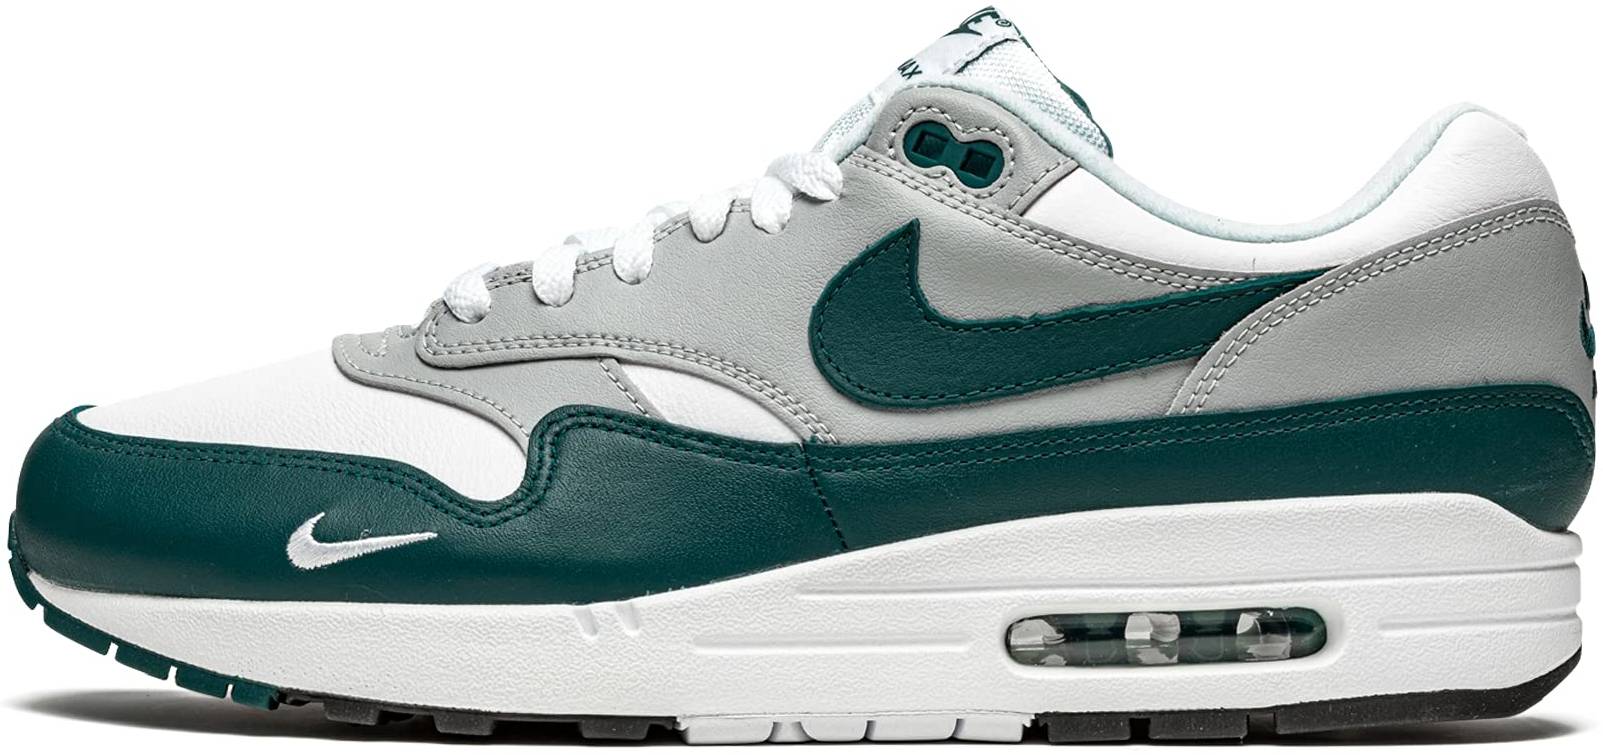 Nike green and white air max Air Max 1 LV8 sneakers in 3 colors (only $95) | RunRepeat